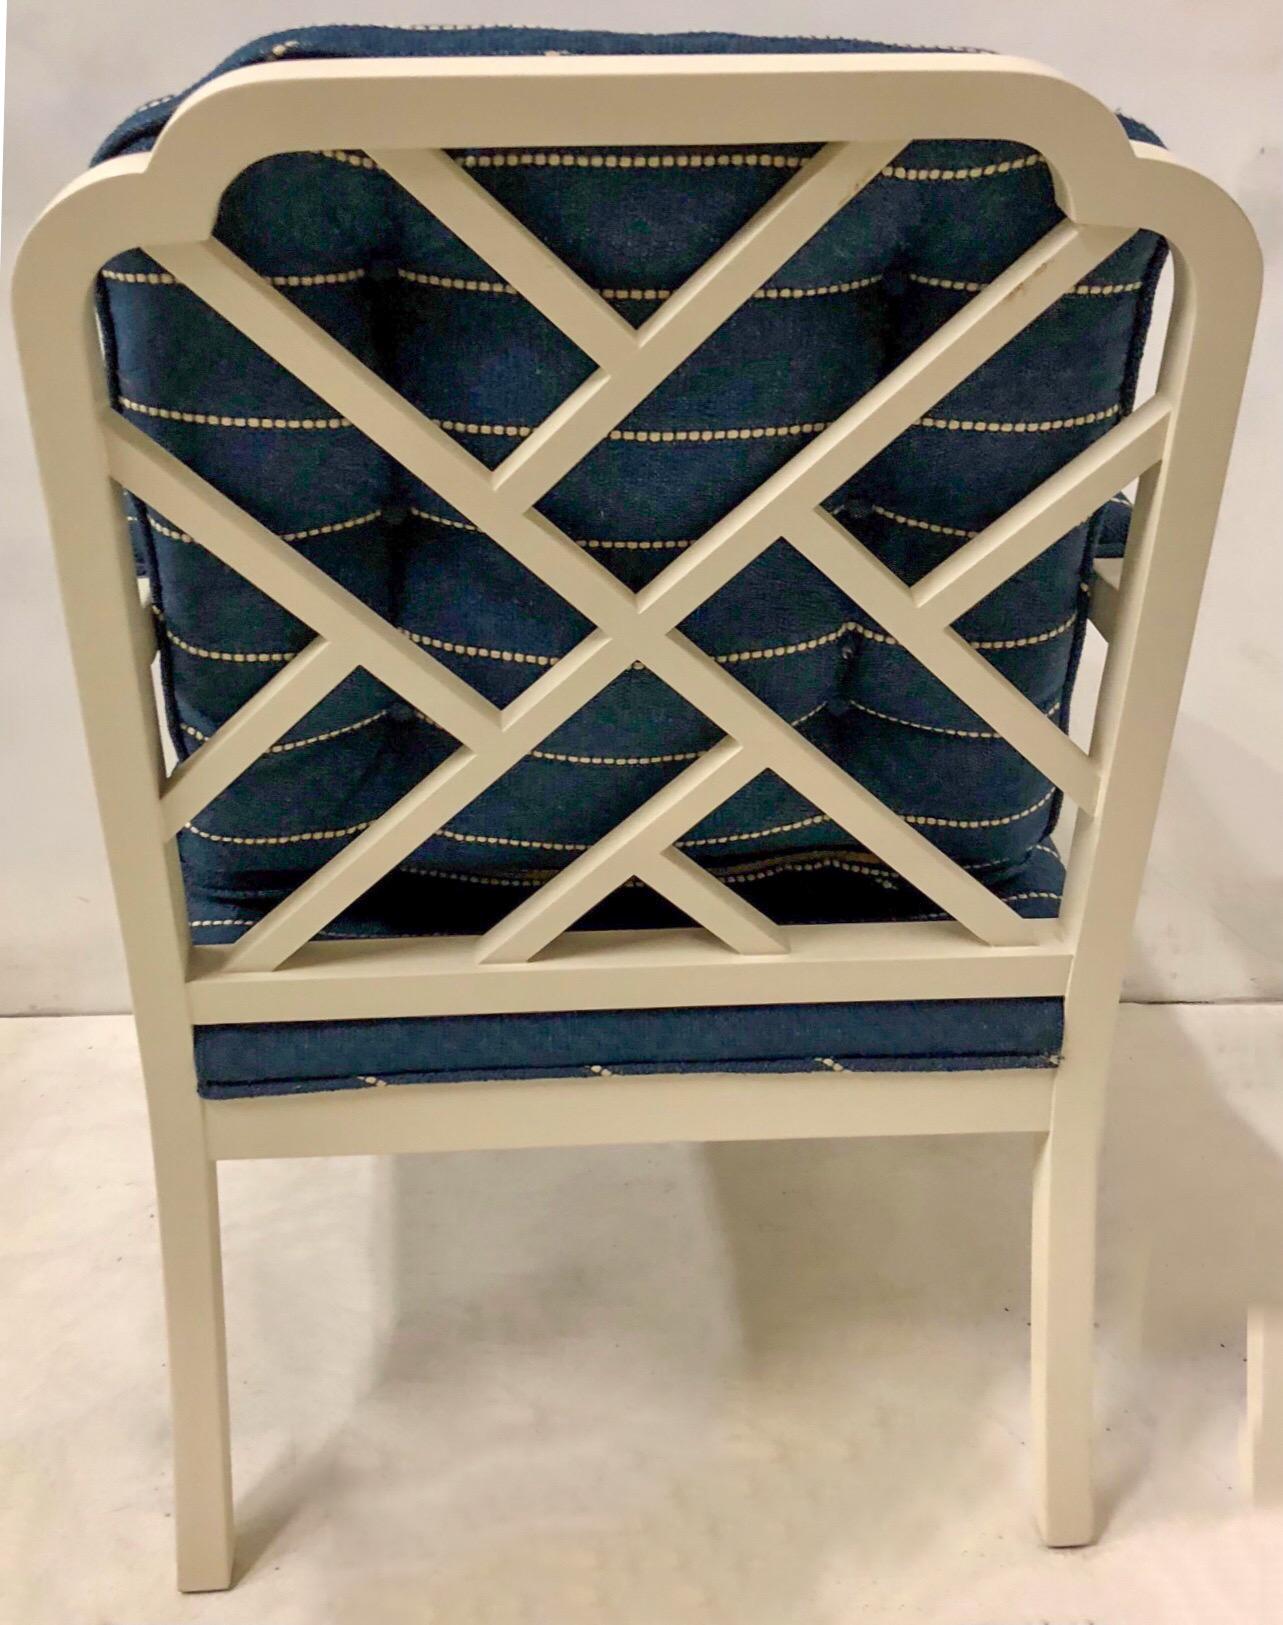 These Erwin Lambeth chairs date to the 1970s. They have Chinese chippendale styling and have been given a fresh update with a satin linen white paint and textured linen upholstery. They are marked and in very good condition. See the available